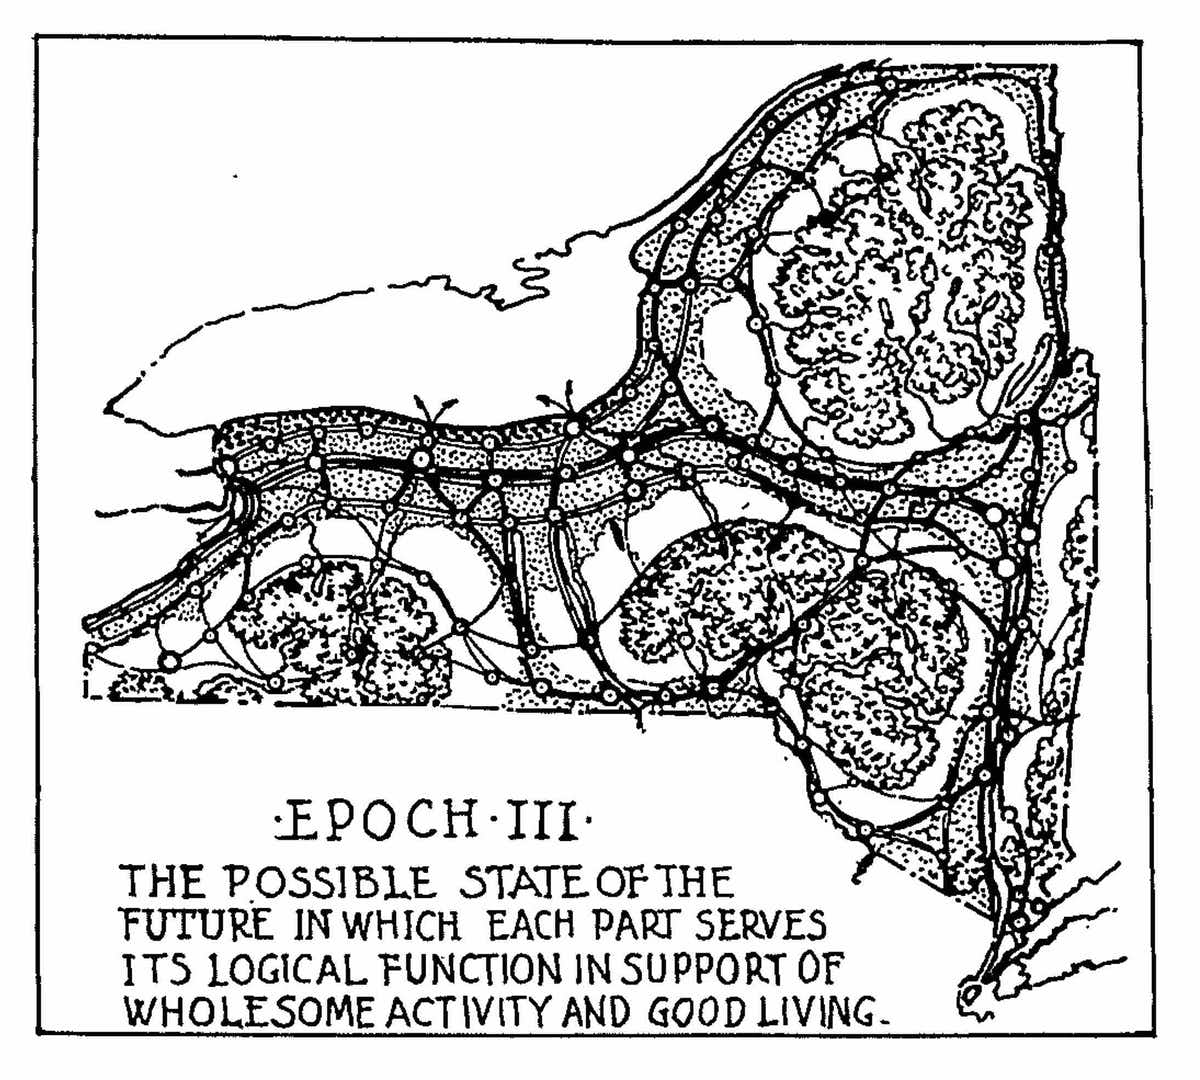 Henry Wright was inspired by the idea of the city comprised of ‘cells’. Report of the State of New York Commission of Housing and Regional Planning (1926)